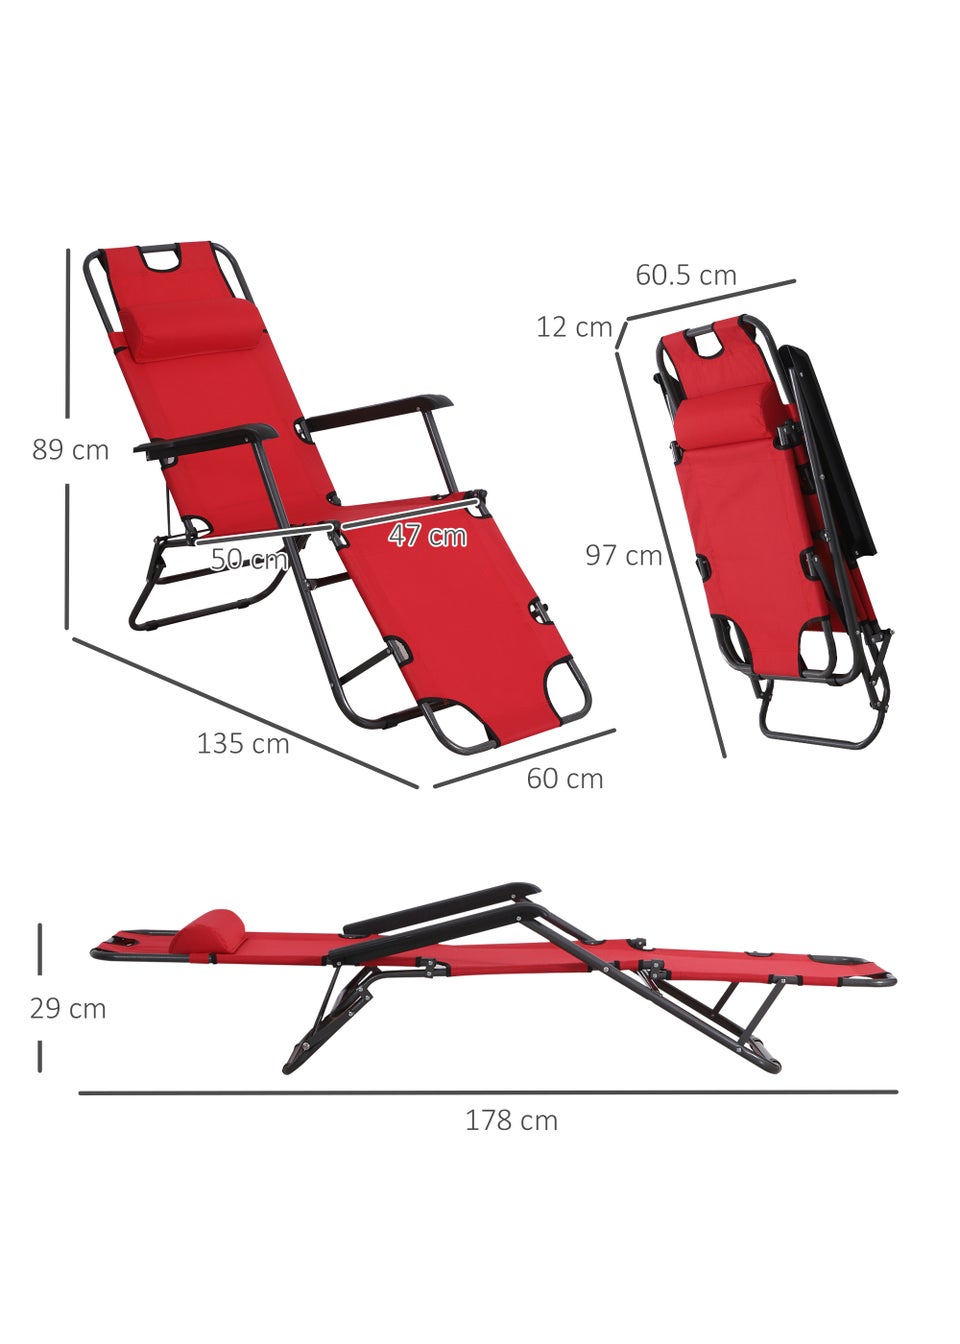 Outsunny 2 in 1 Folding Sun Lounger & Camping Chair (135cm x 60cm x 89cm)